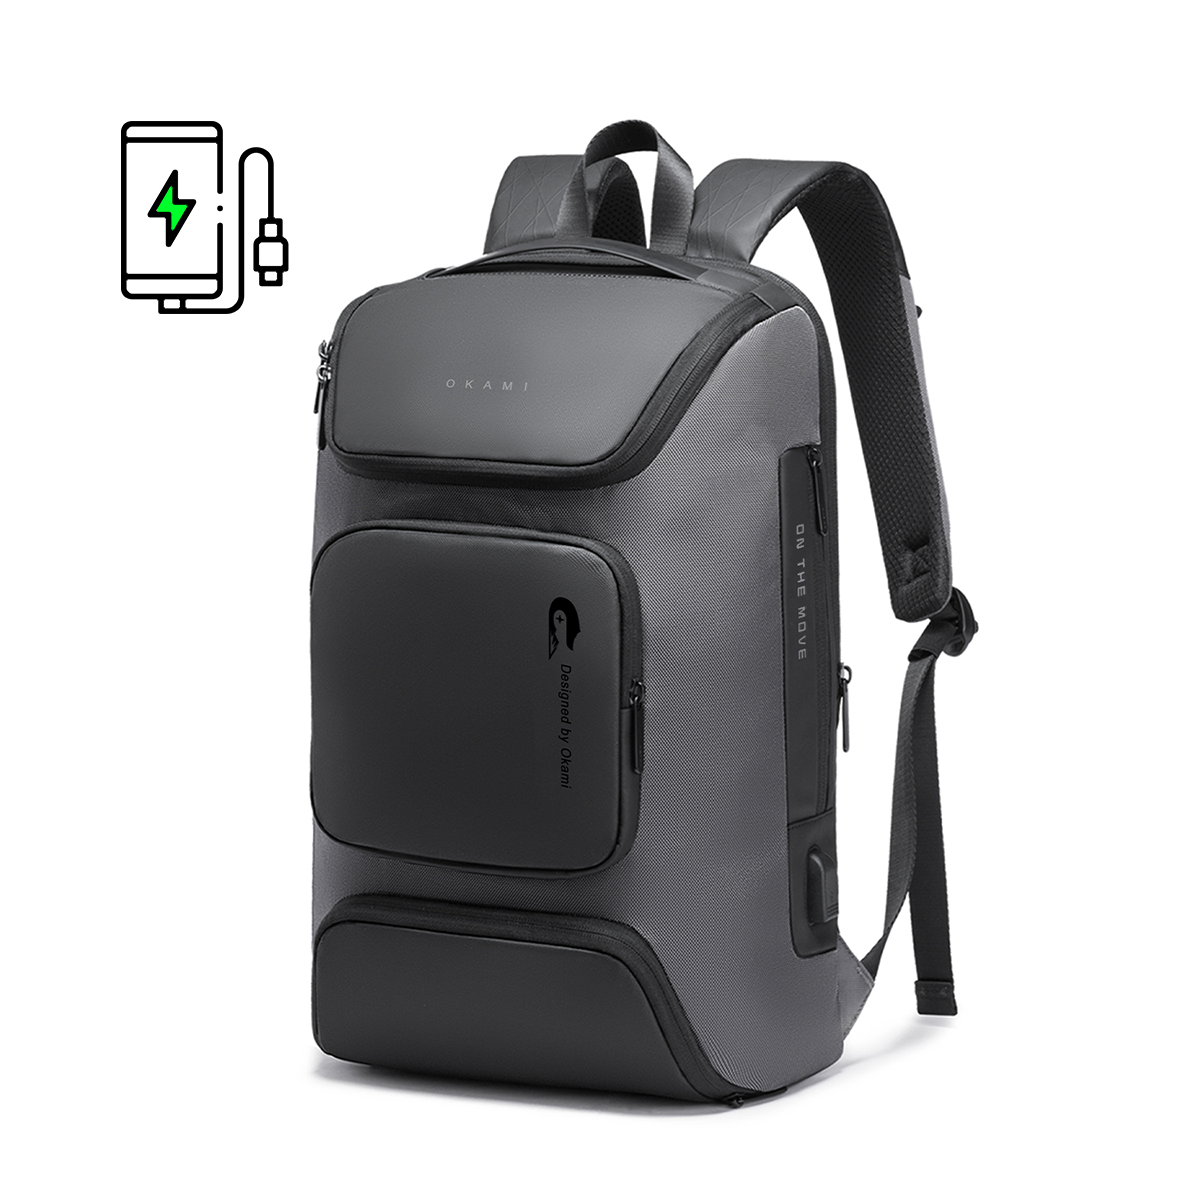 Nomad Laptop Backpack (Onyx Grey) with USB Fast-Charging